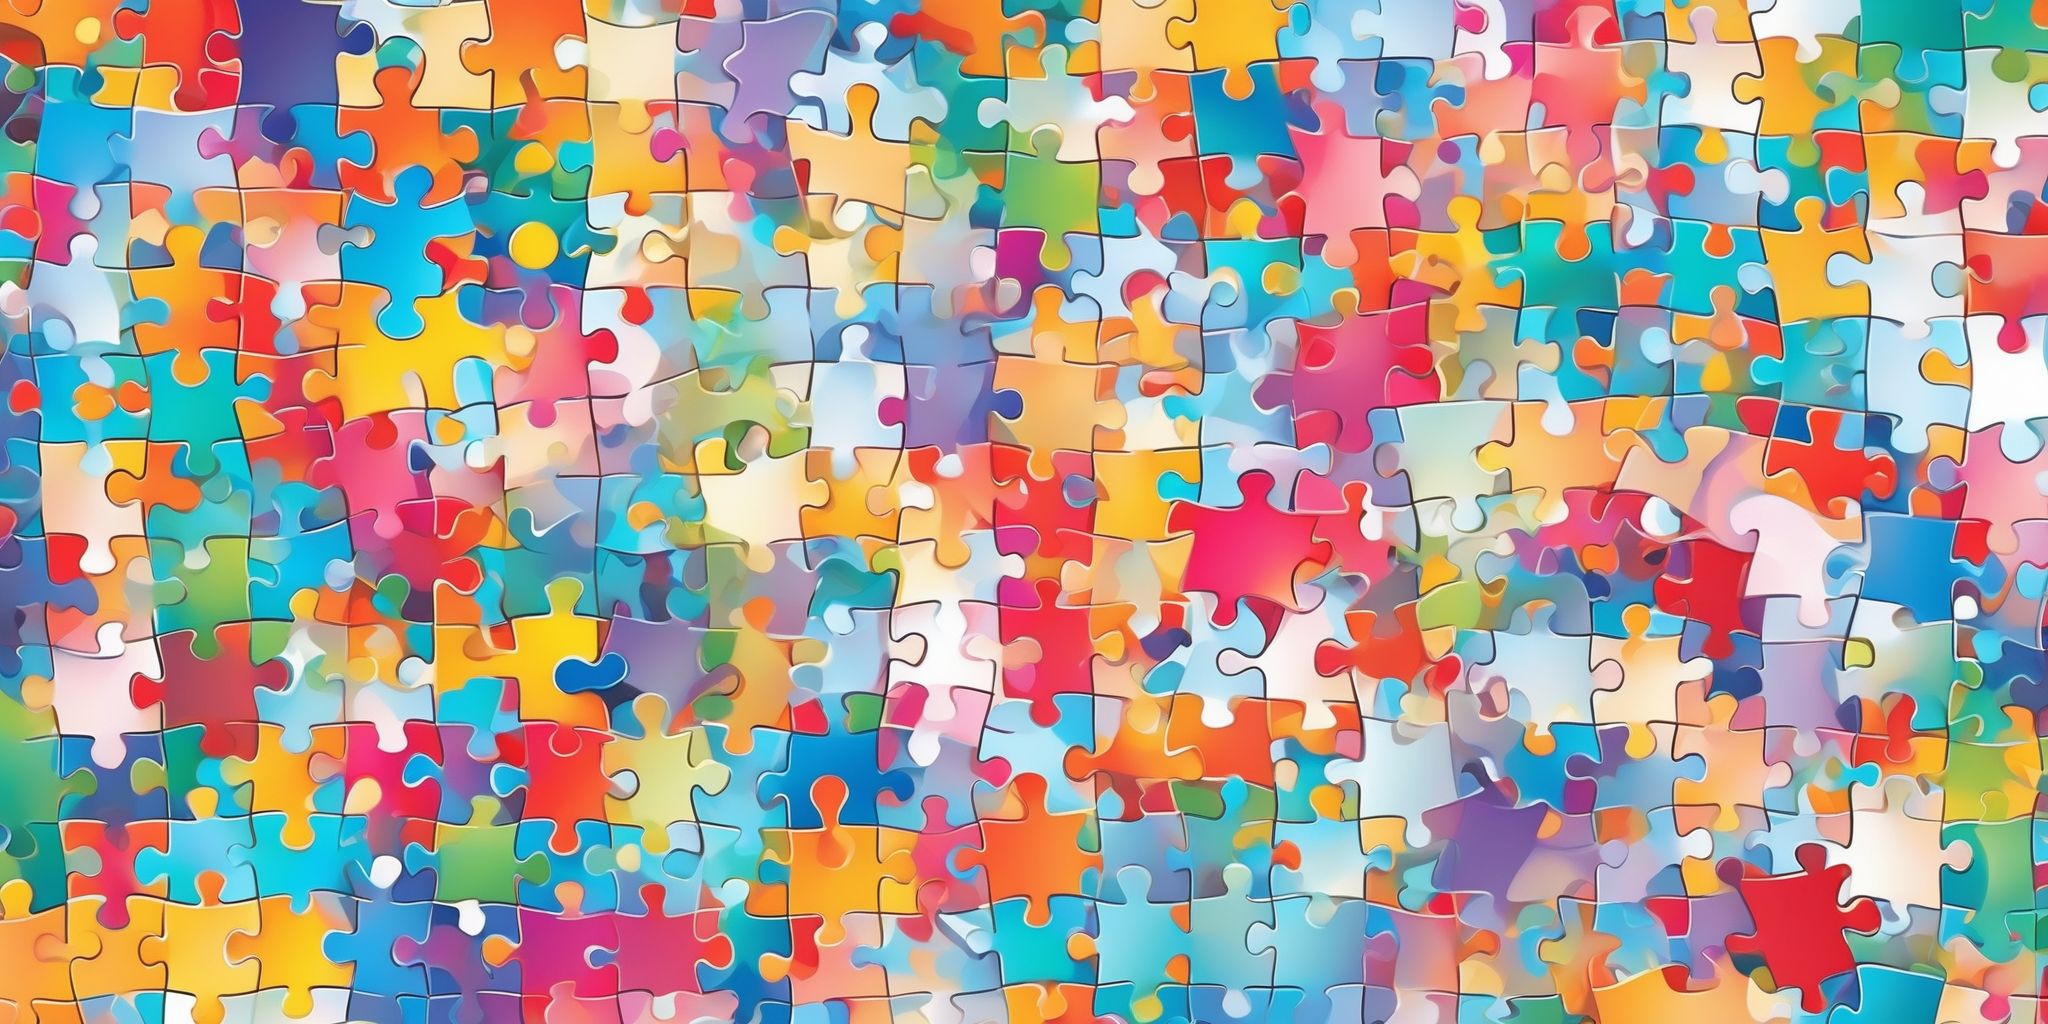 Jigsaw puzzle in illustration style with gradients and white background